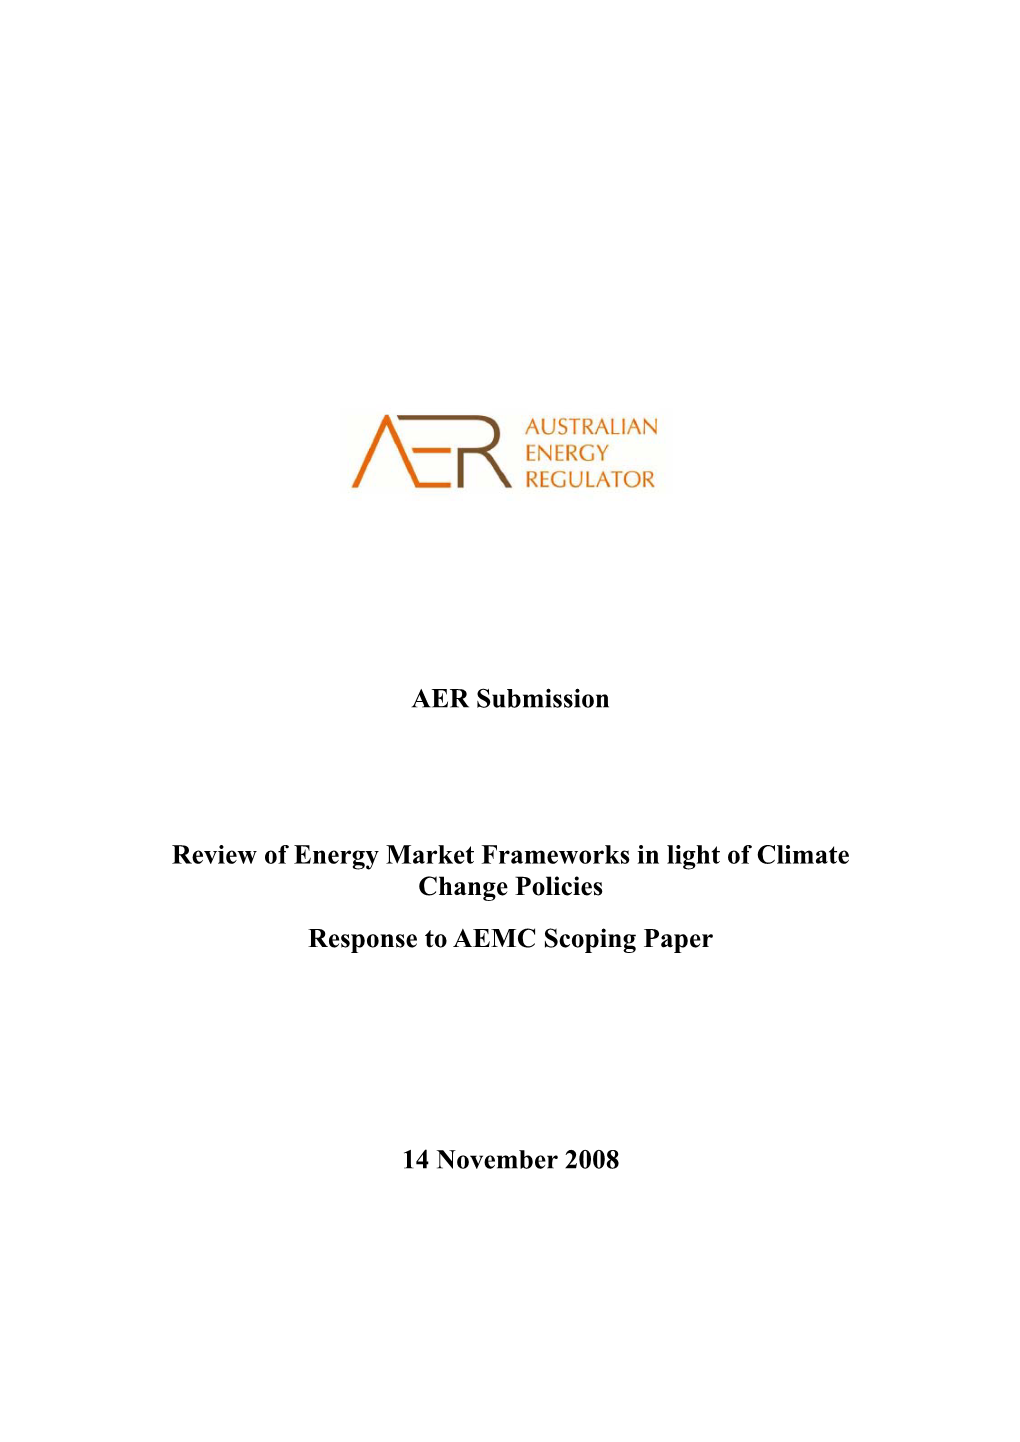 AER Submission Review of Energy Market Frameworks in Light Of